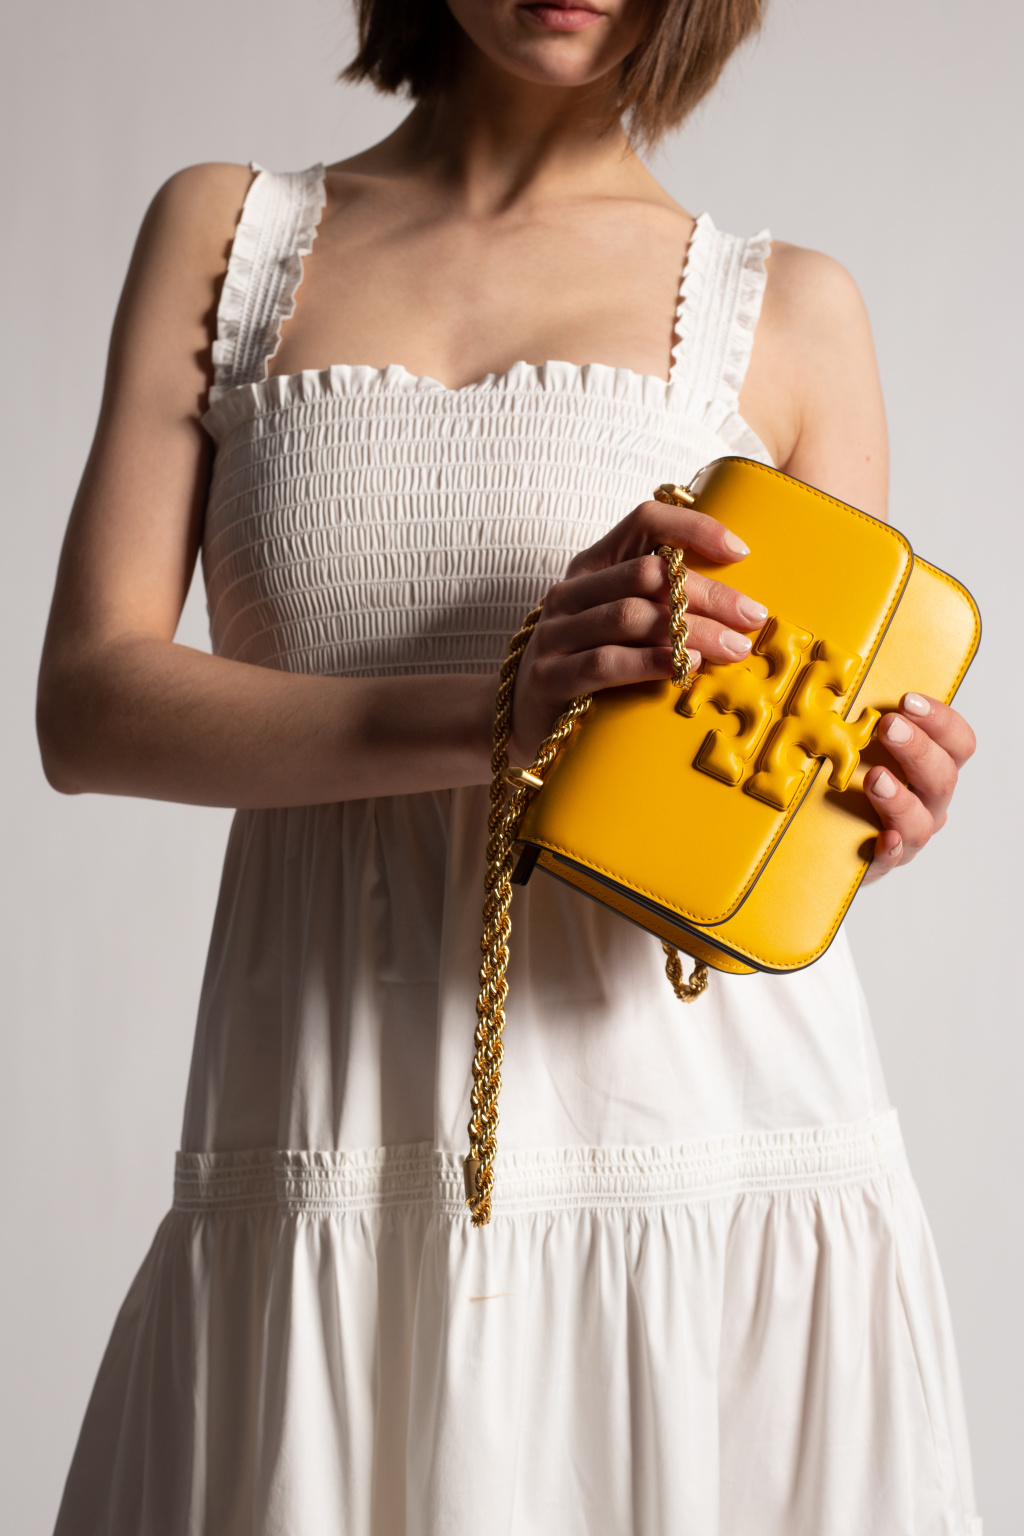 Tory Burch on X: The perfect summer handbag. The Eleanor Bags are